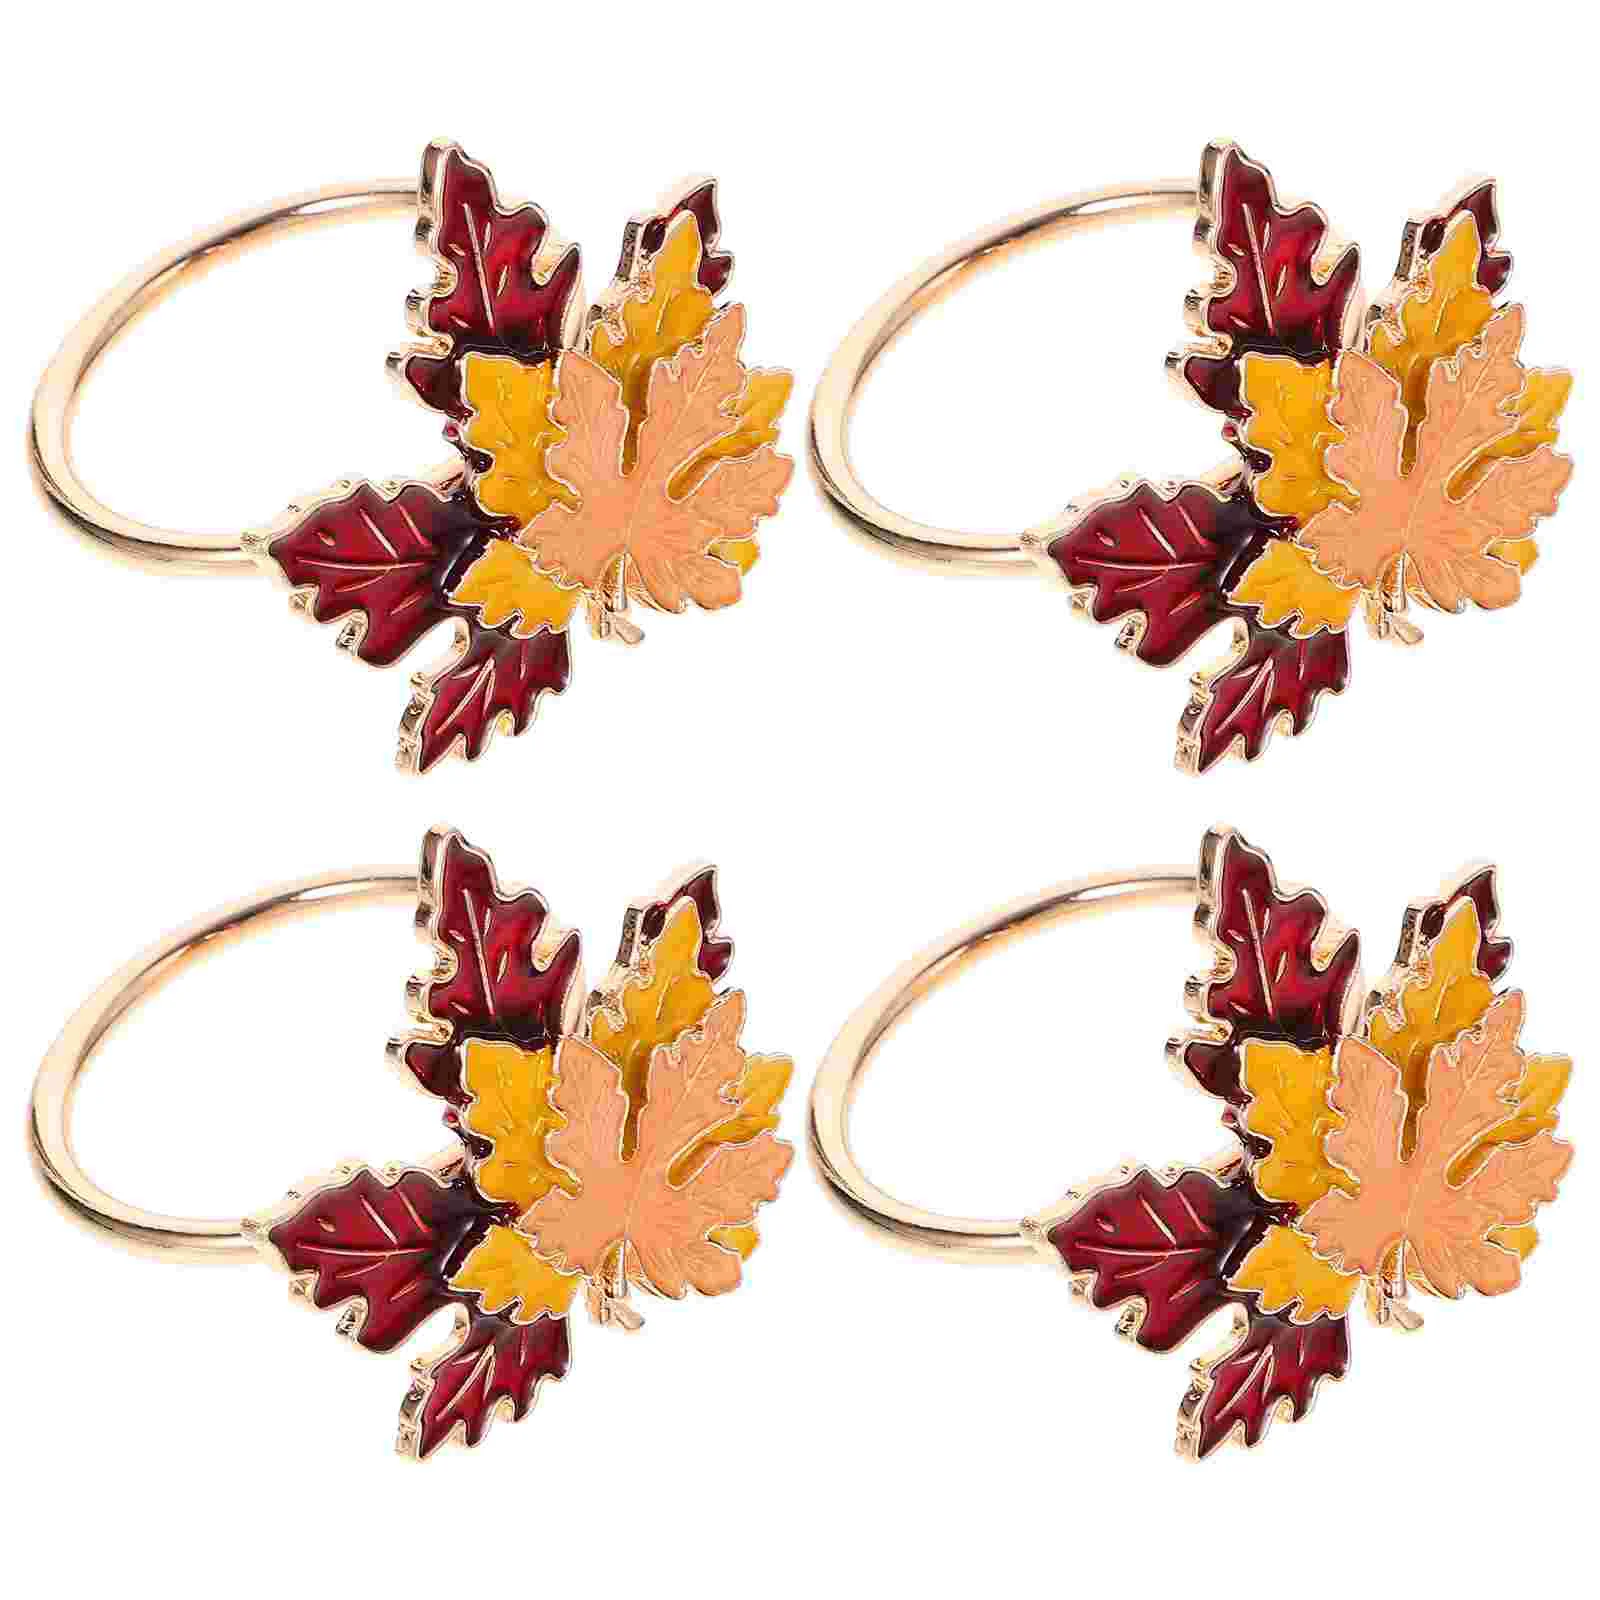 

4 Pcs Maple Leaf Napkin Rings Paper Holder Holders Tables Leaves Napkins Autumn Banquet Epoxy Thanksgiving Wedding Christmas